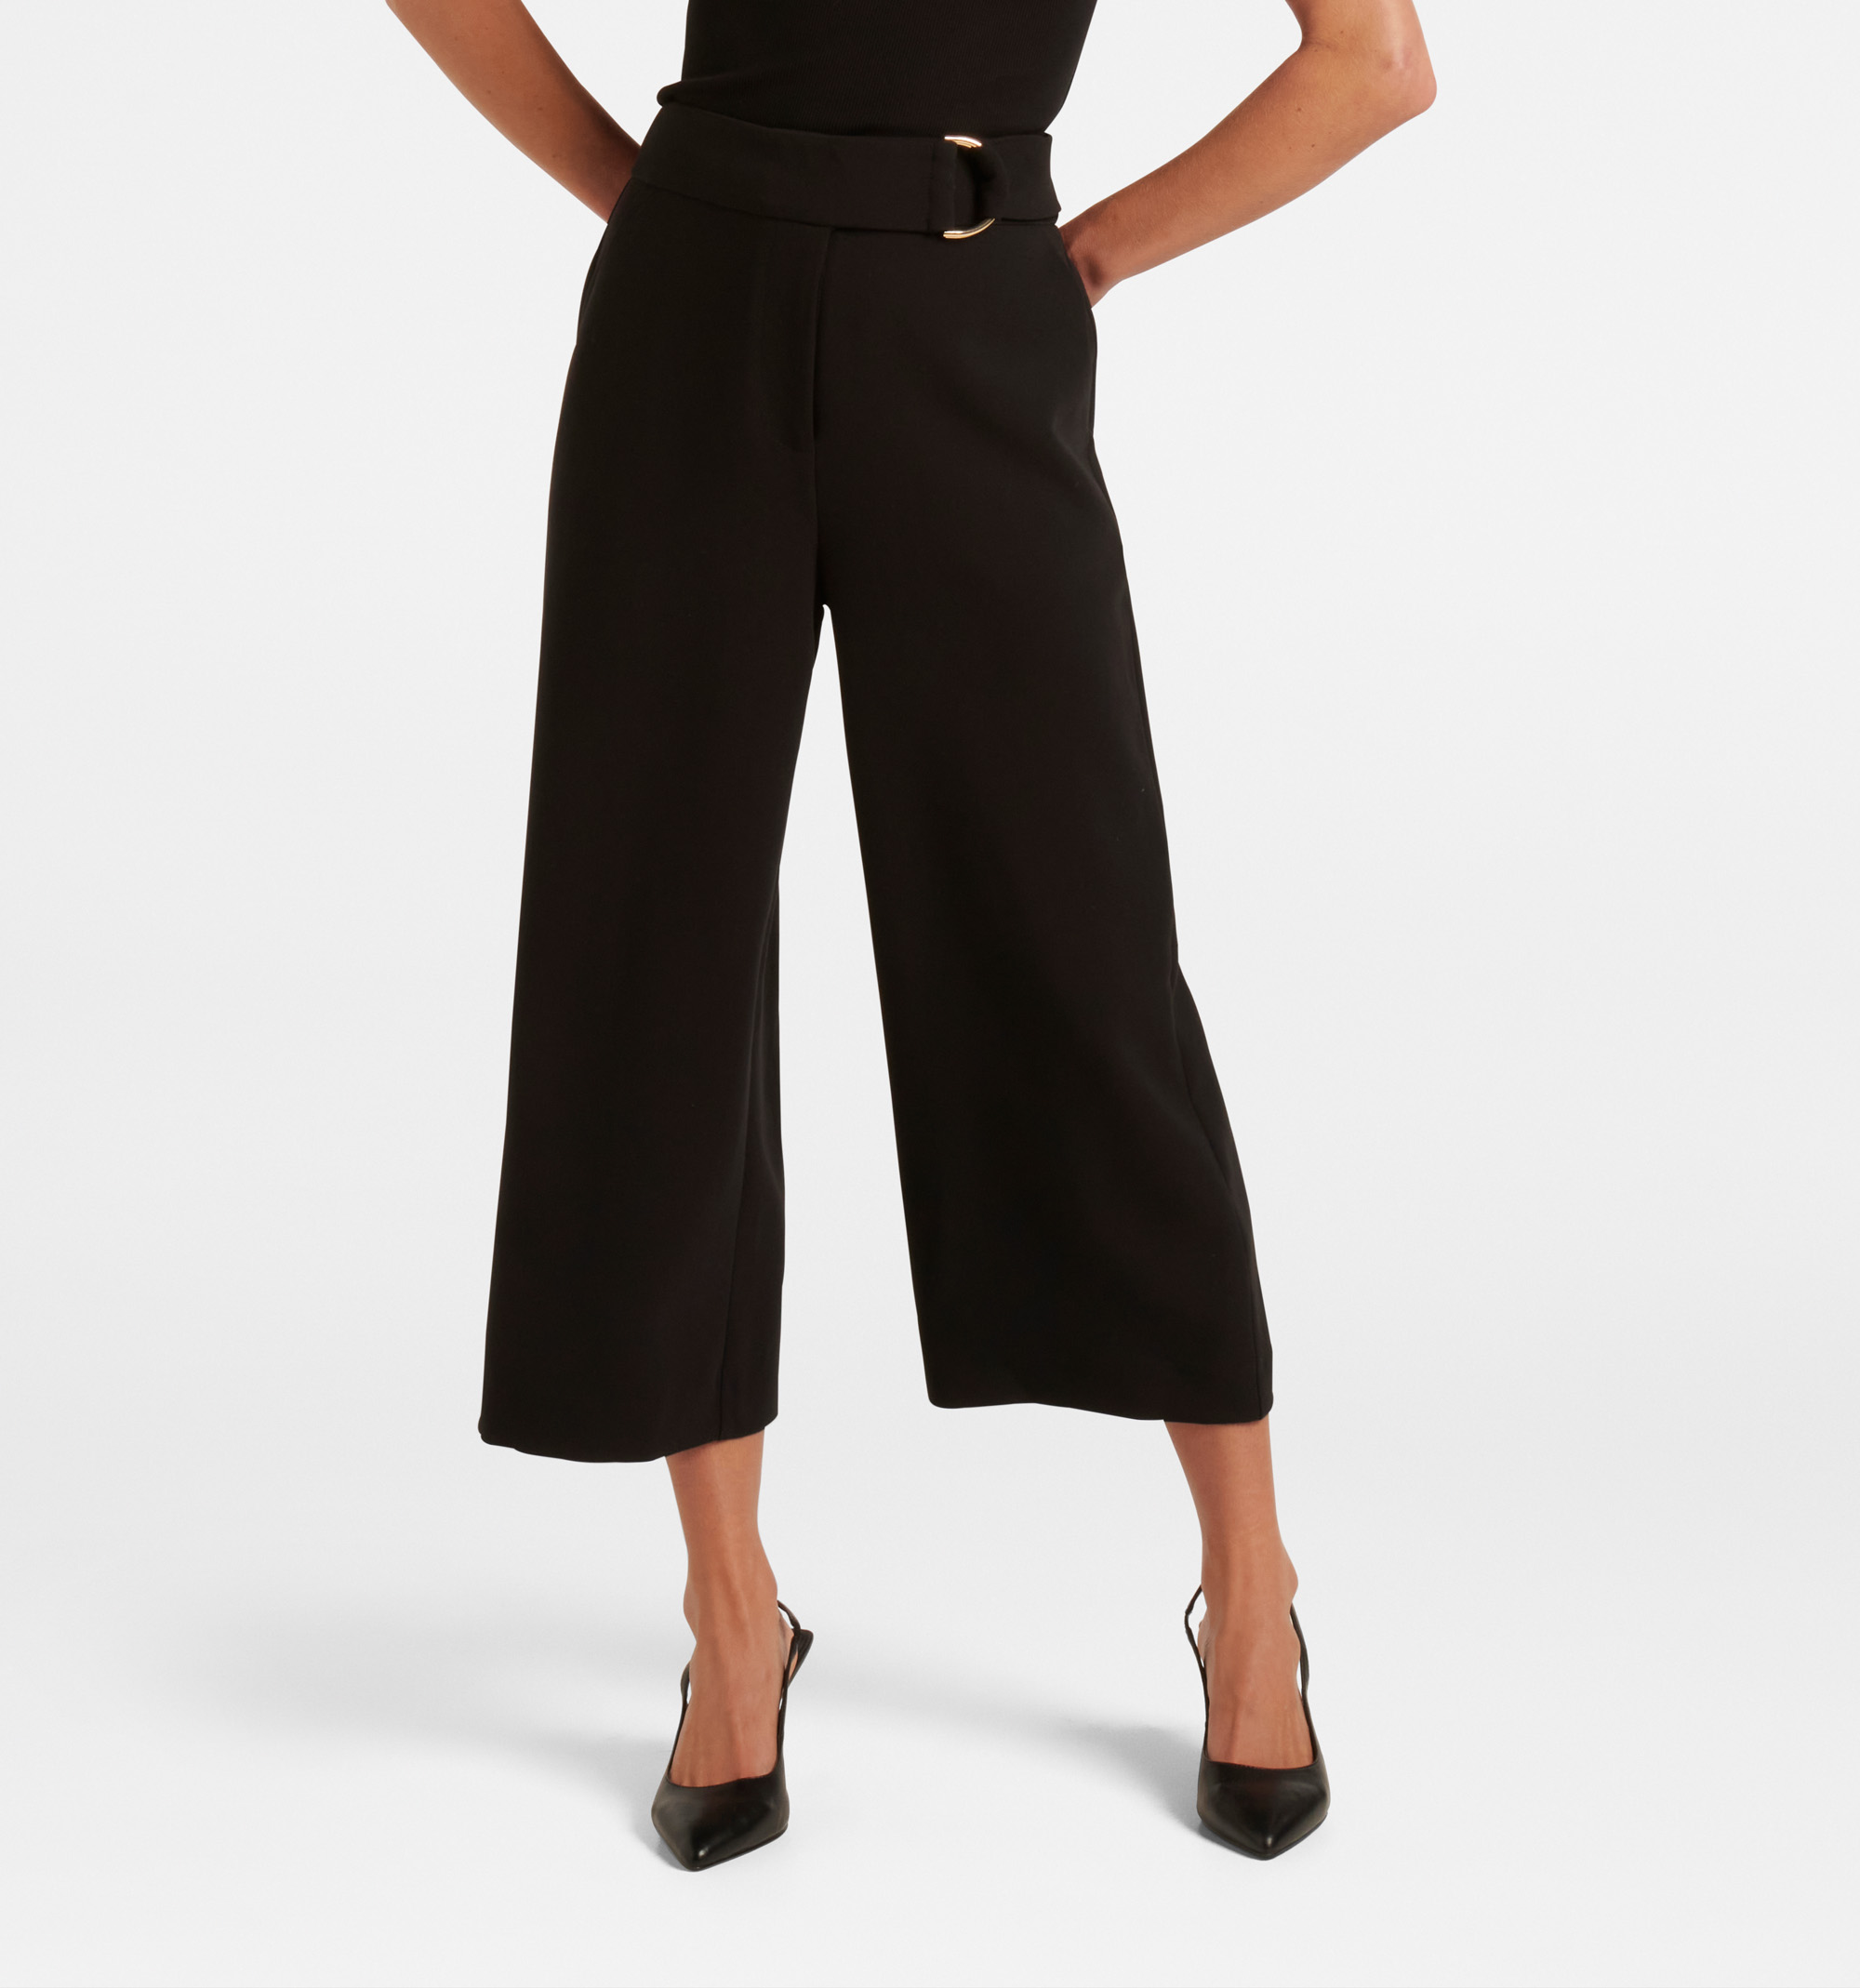 Are culottes and pallazo pants the same? If not, how do they